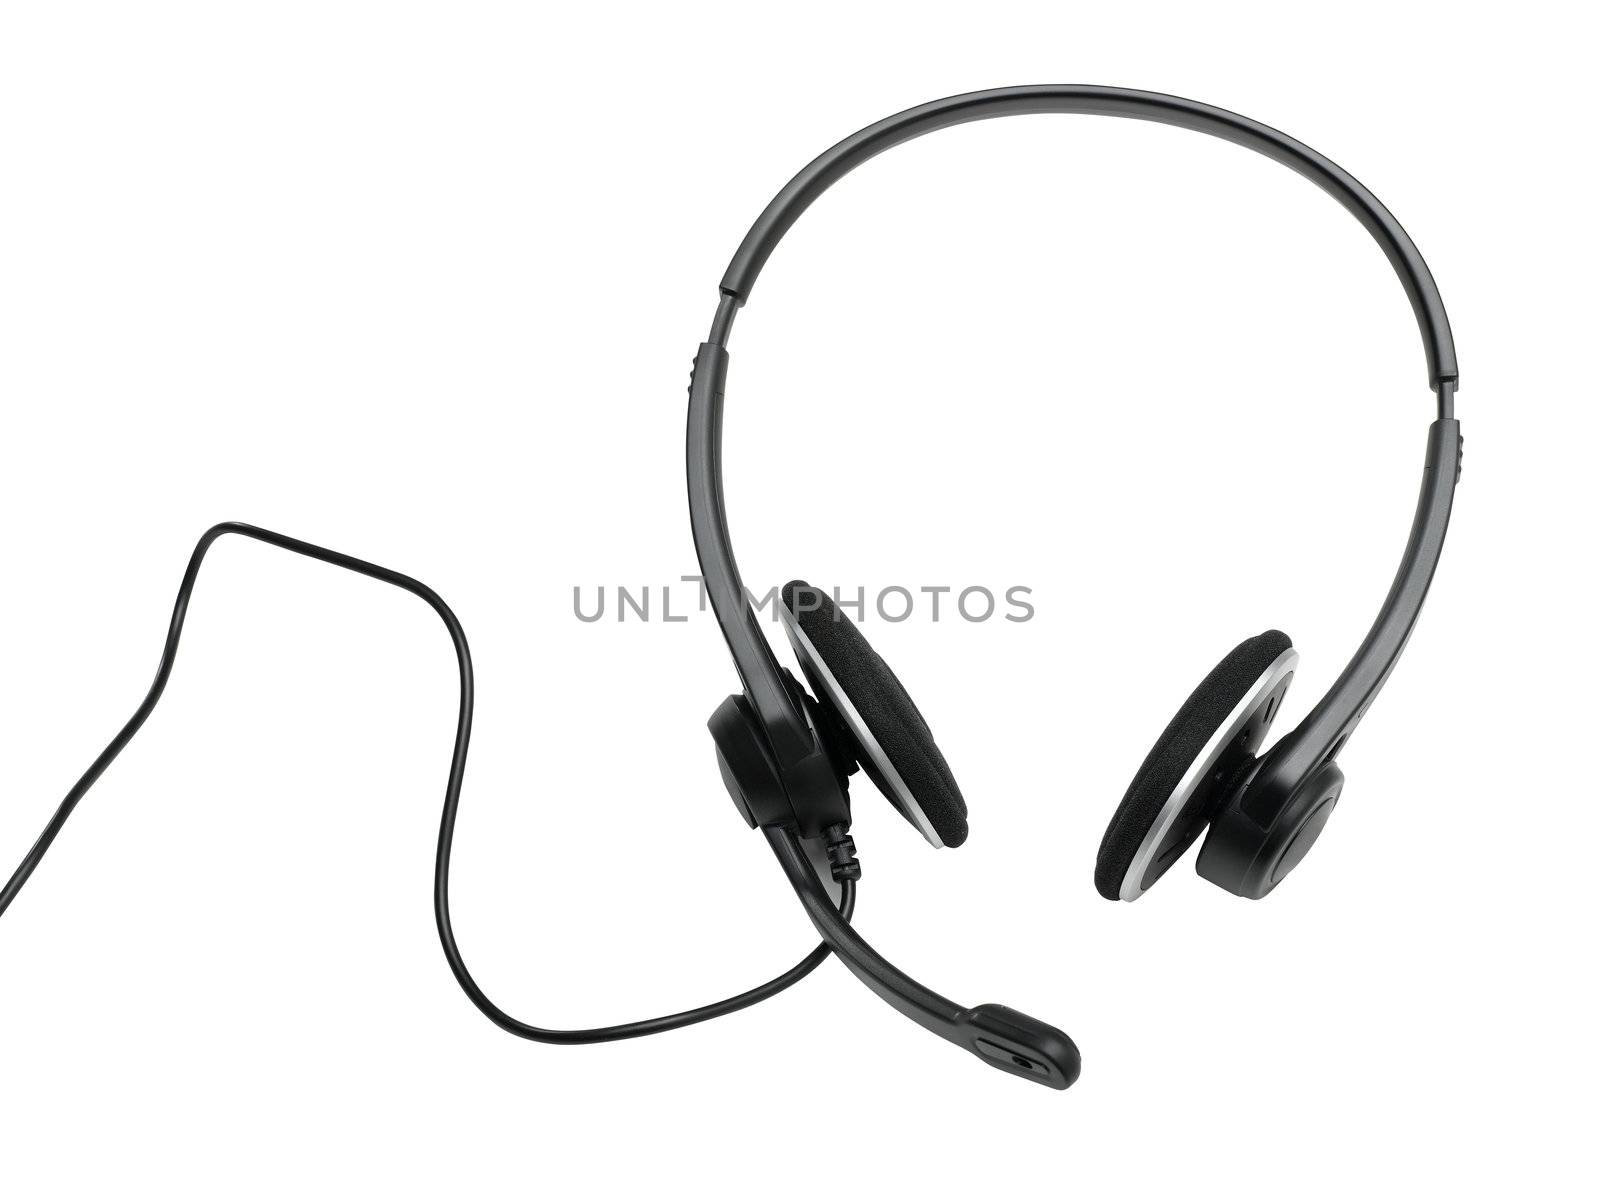 audio headset (clipping path) on white background